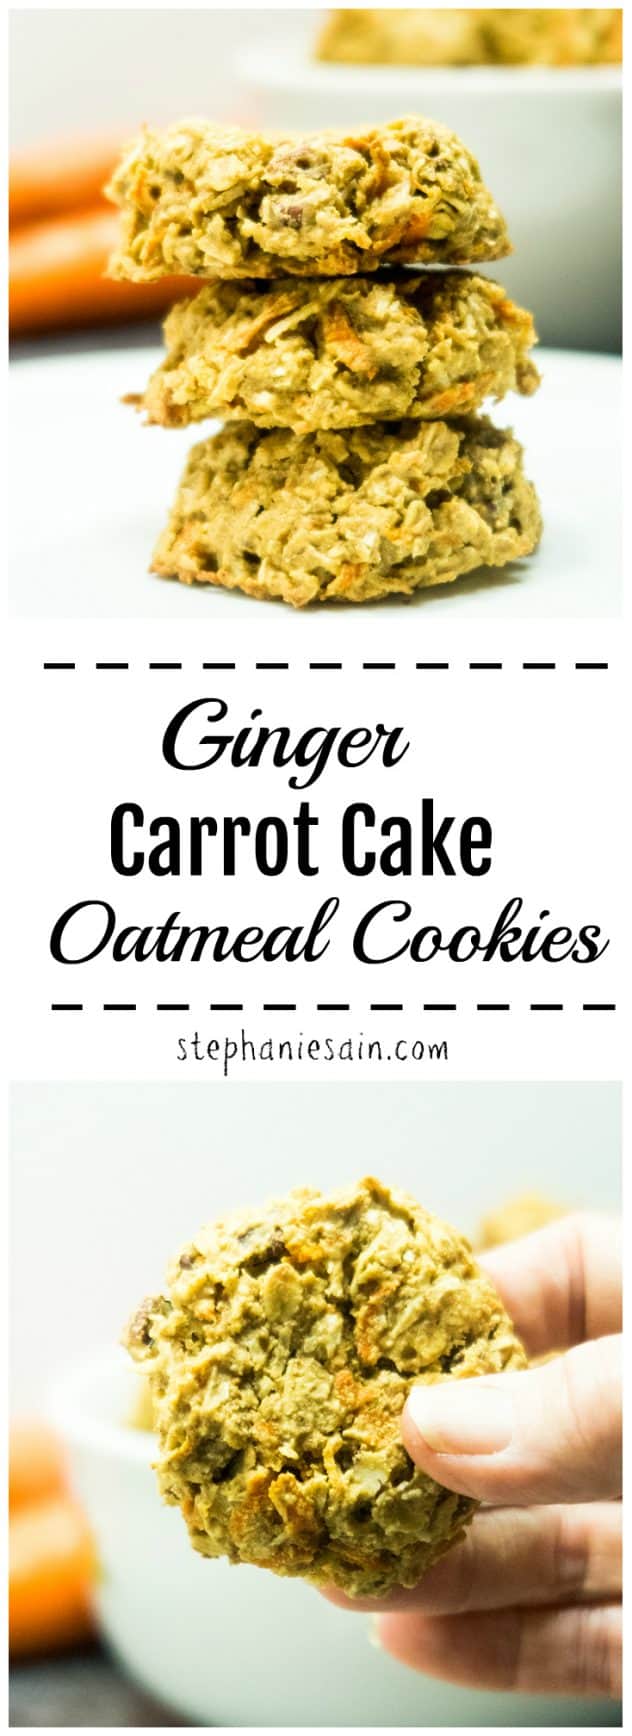 Carrot Cake Cookies - Dairy Free - Shaw Simple Swaps